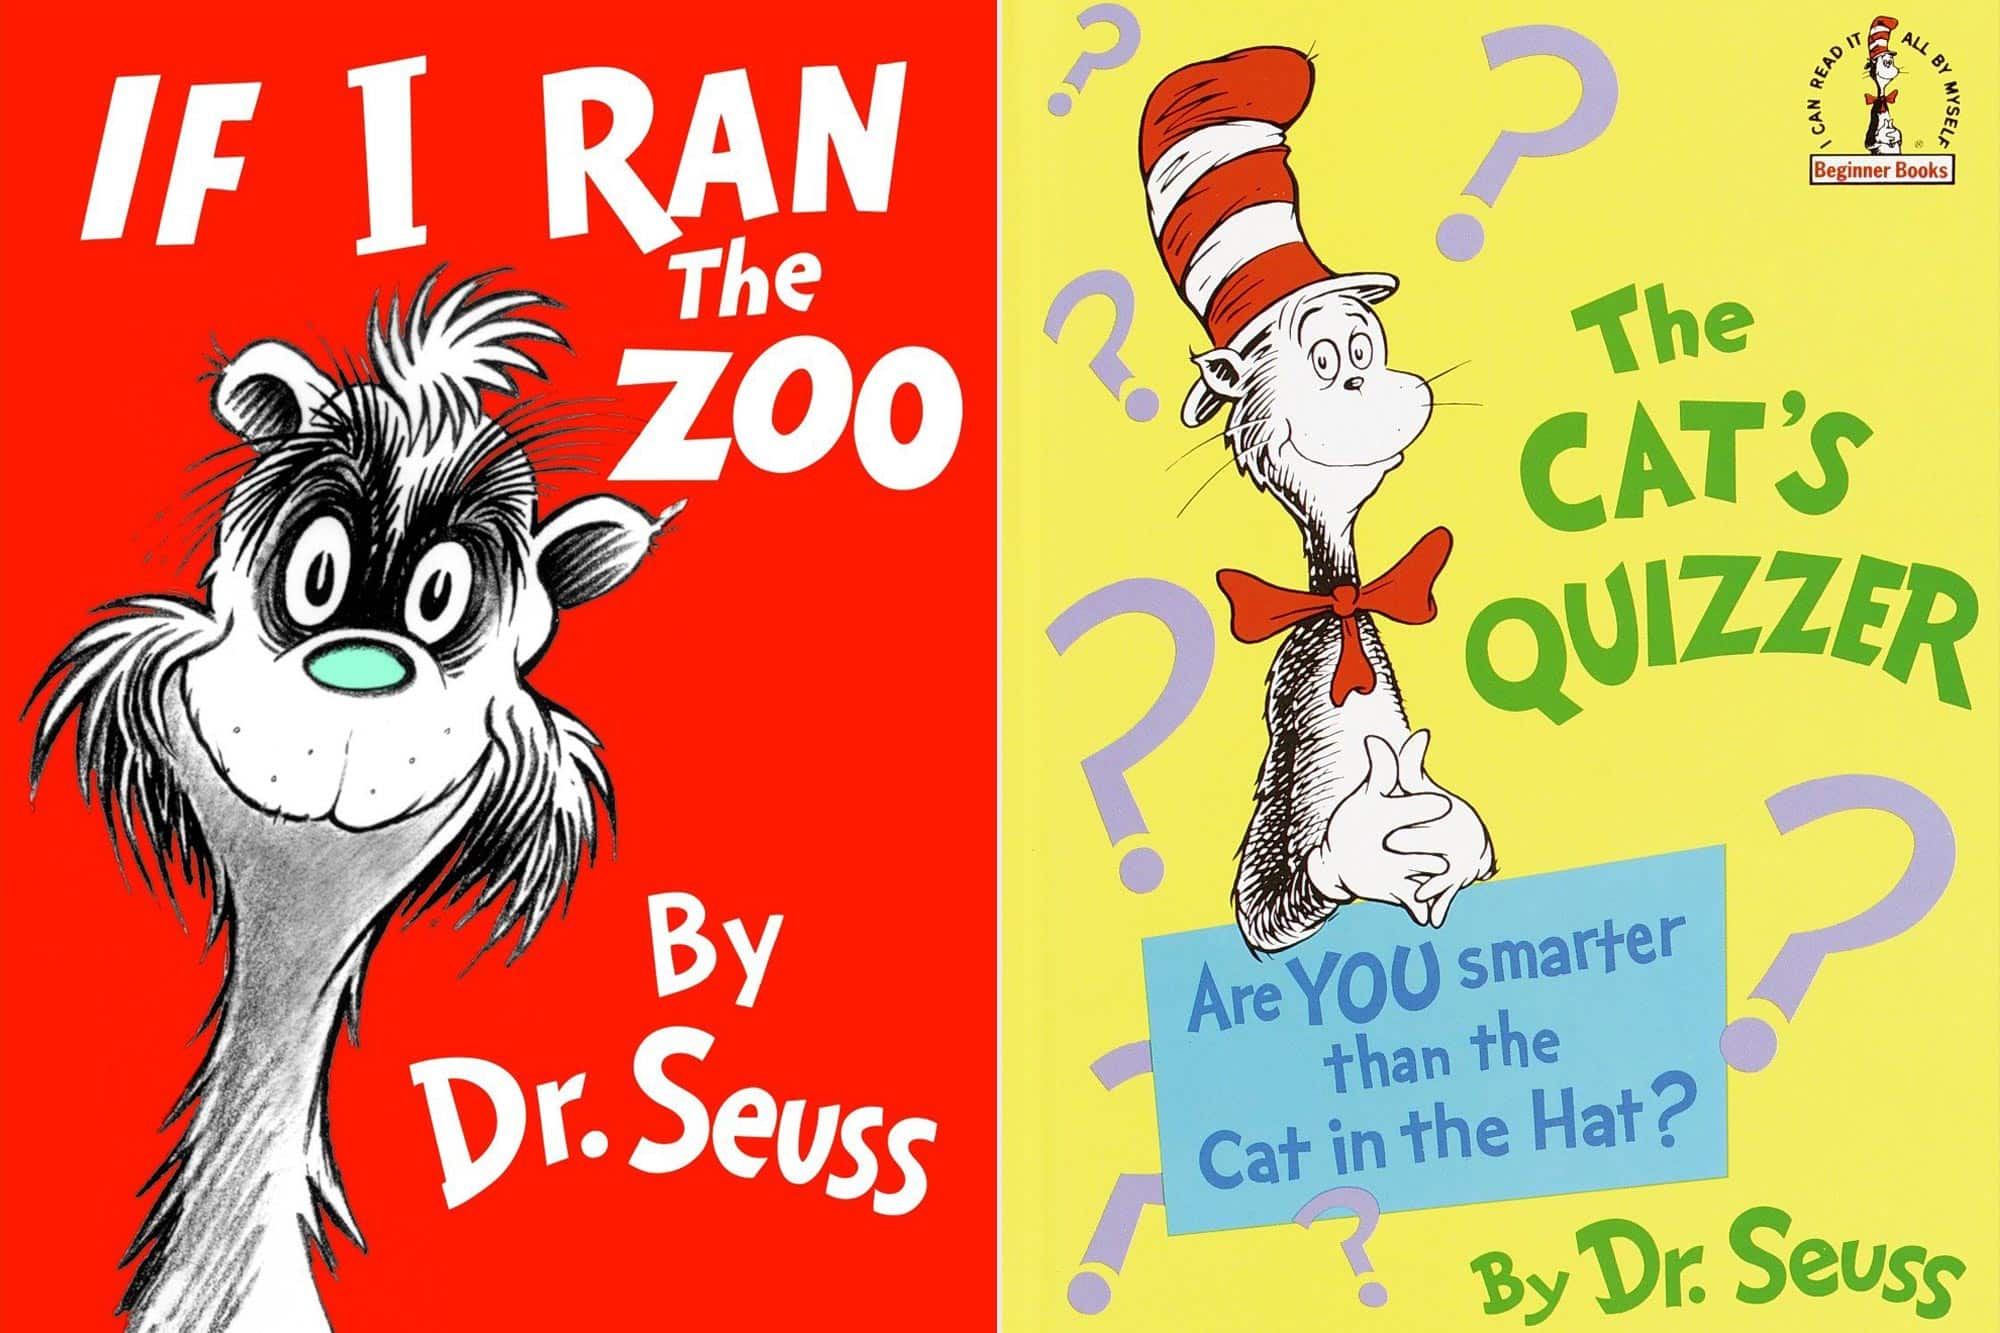 'Cancel Culture' Has Come For "Dr. Seuss" - Books Dropped by Publisher